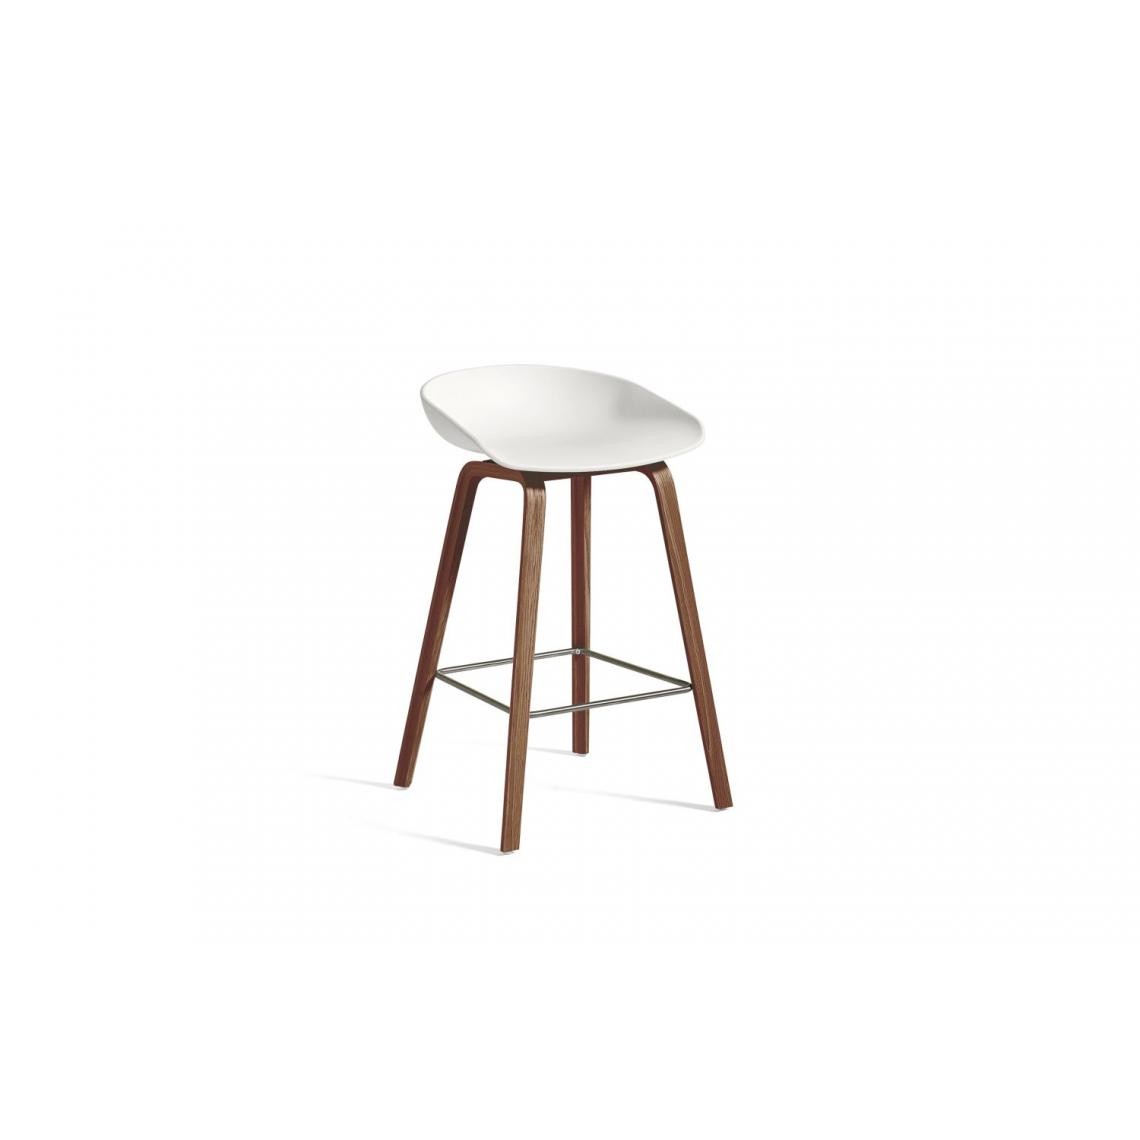 Hay - About A Stool AAS 32 ECO noyer - Hauteur d'assise 65 cm - repose-pied acier inoxydable - blanc - Tabourets